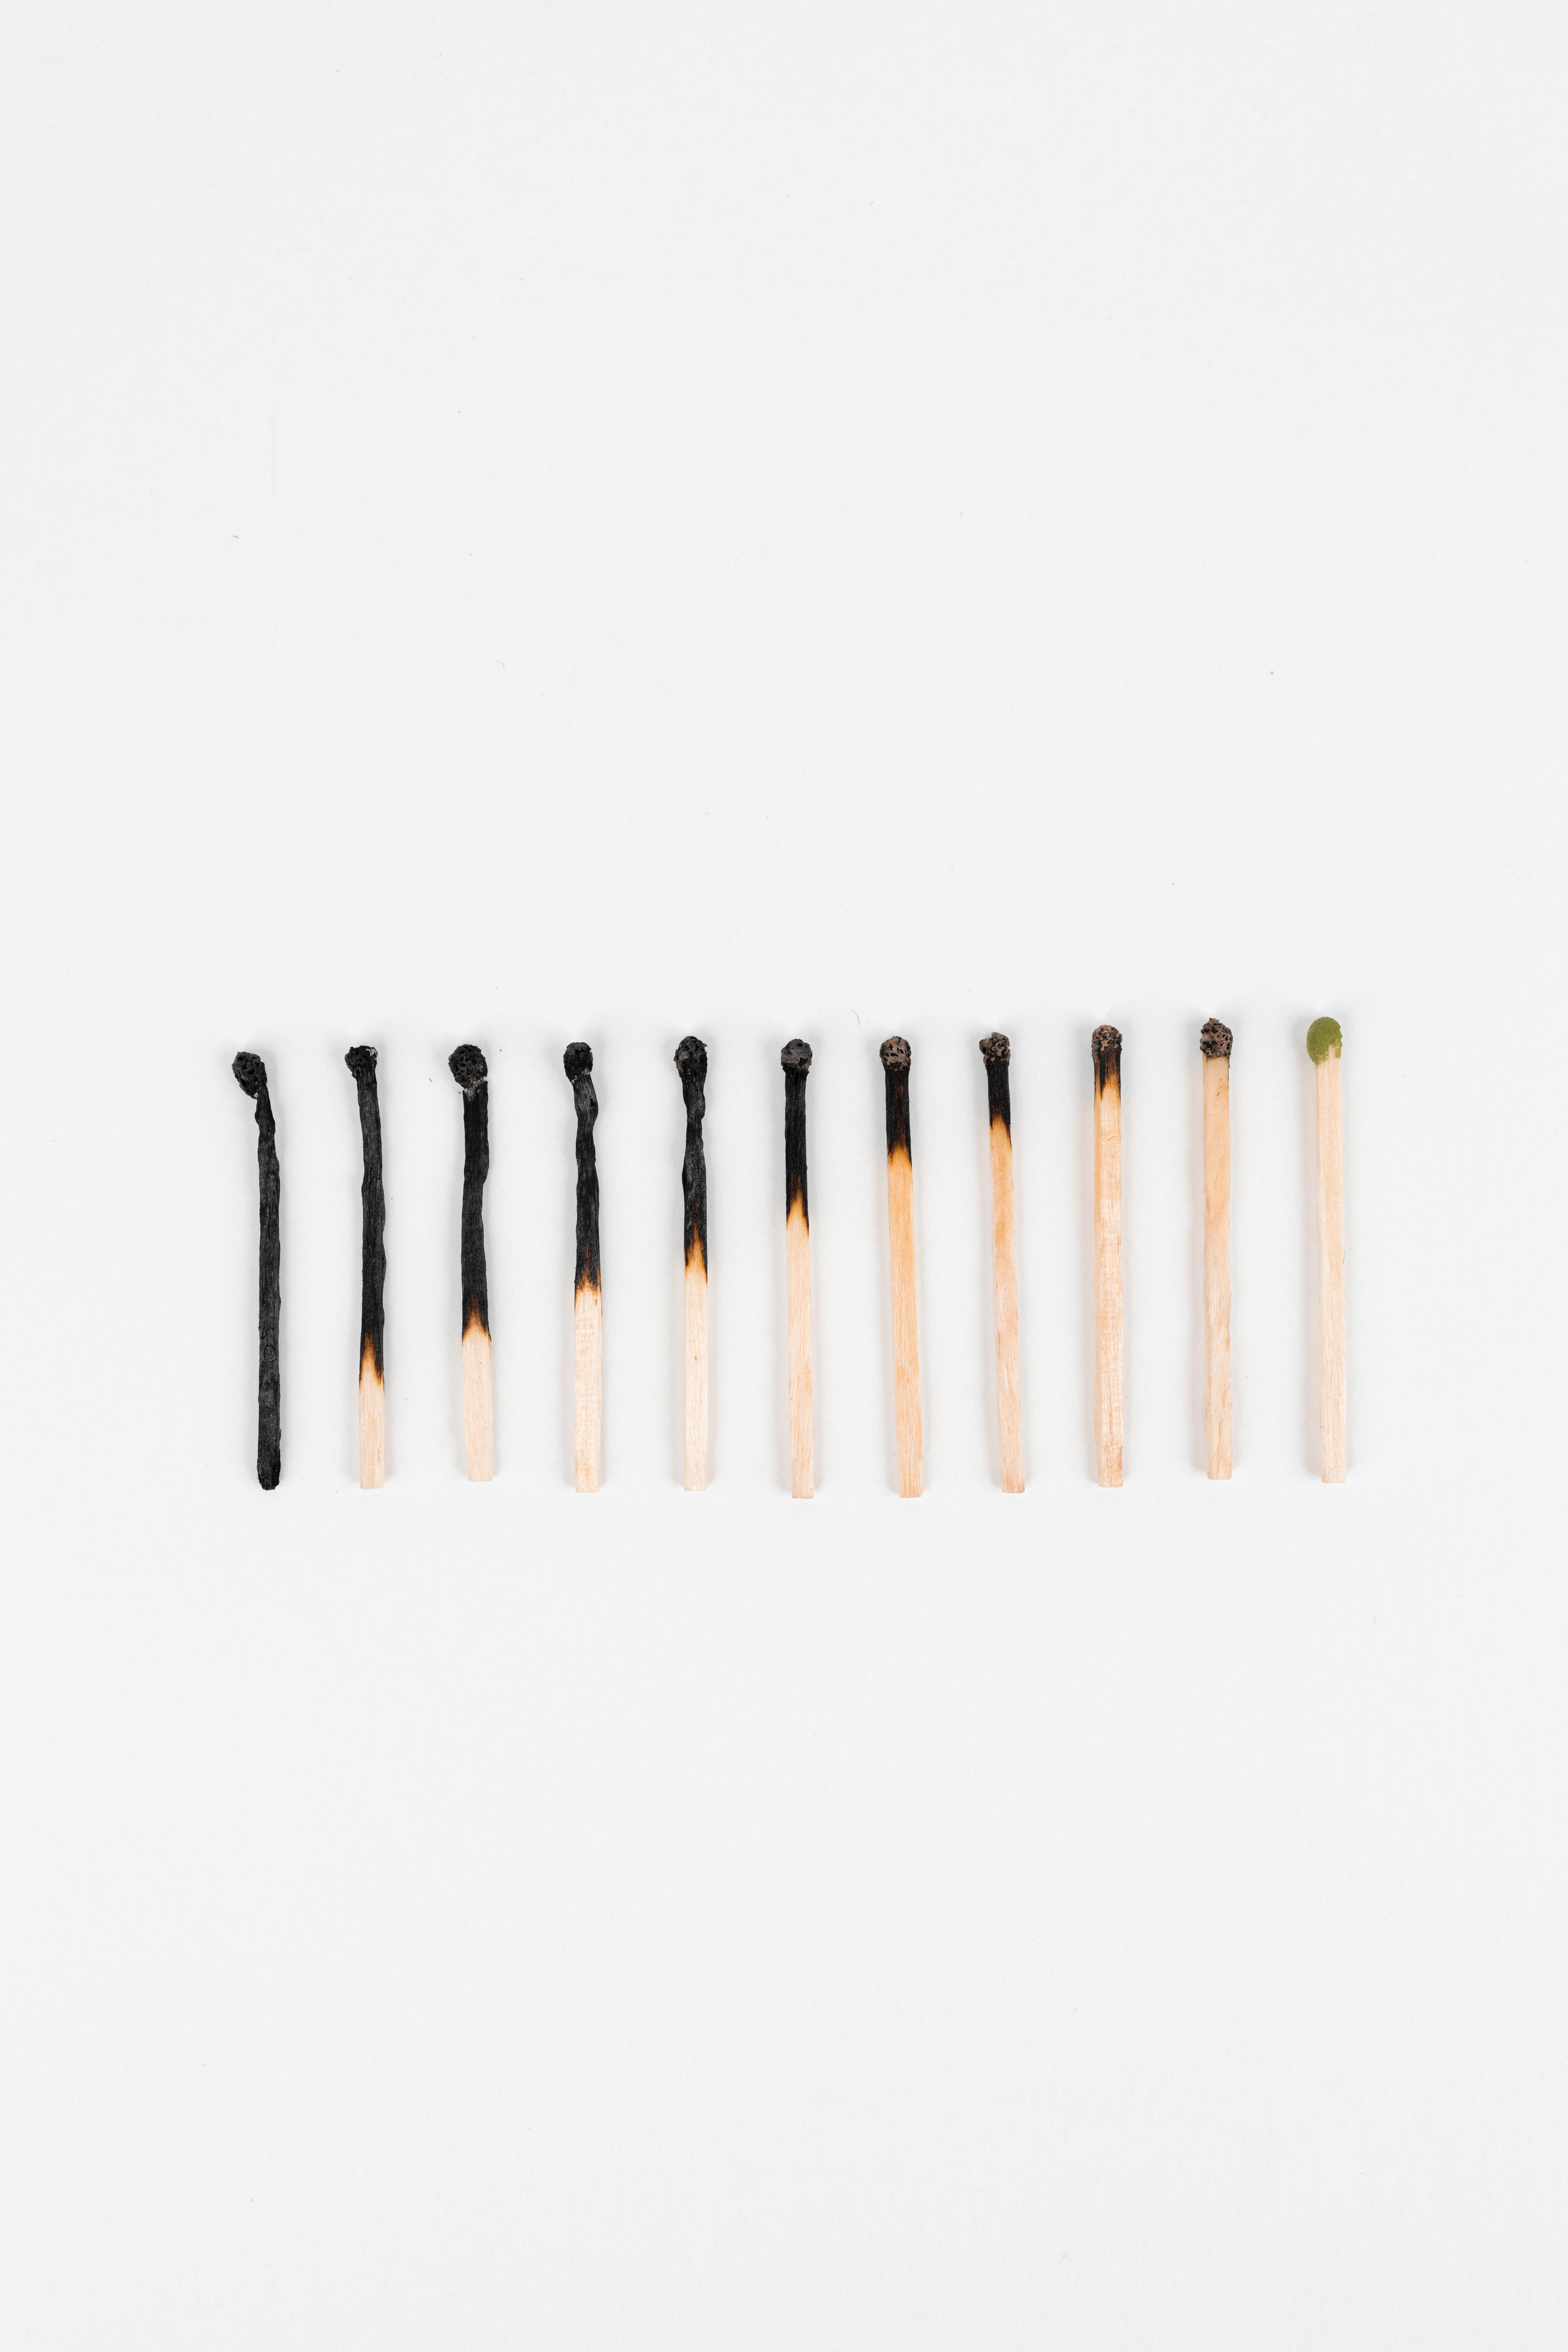 Burnt matches on a white table